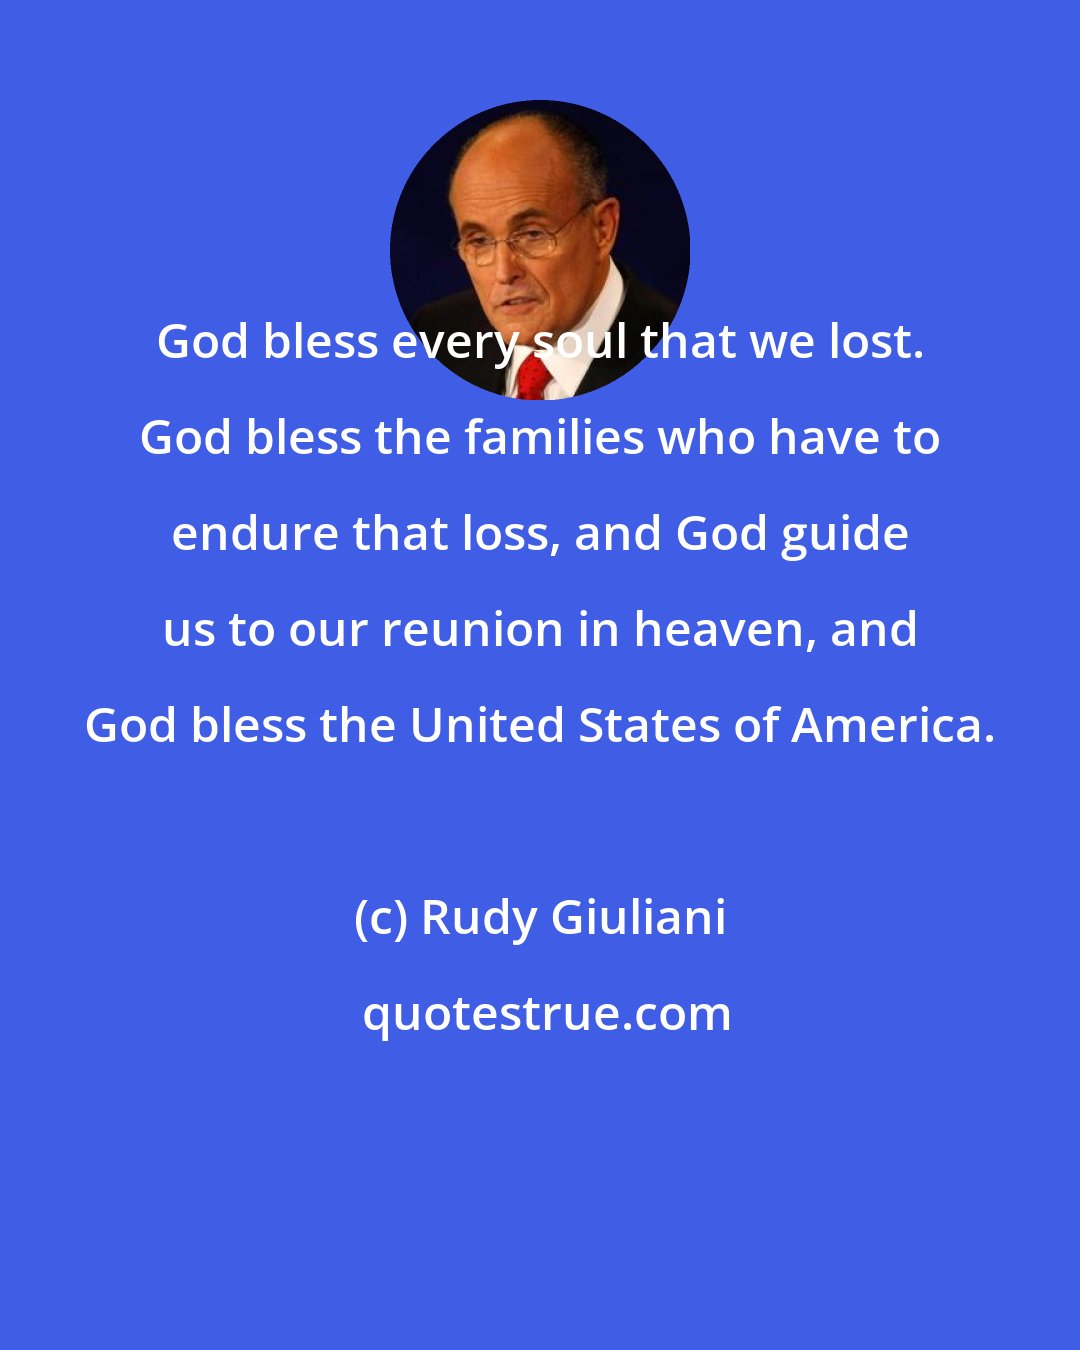 Rudy Giuliani: God bless every soul that we lost. God bless the families who have to endure that loss, and God guide us to our reunion in heaven, and God bless the United States of America.